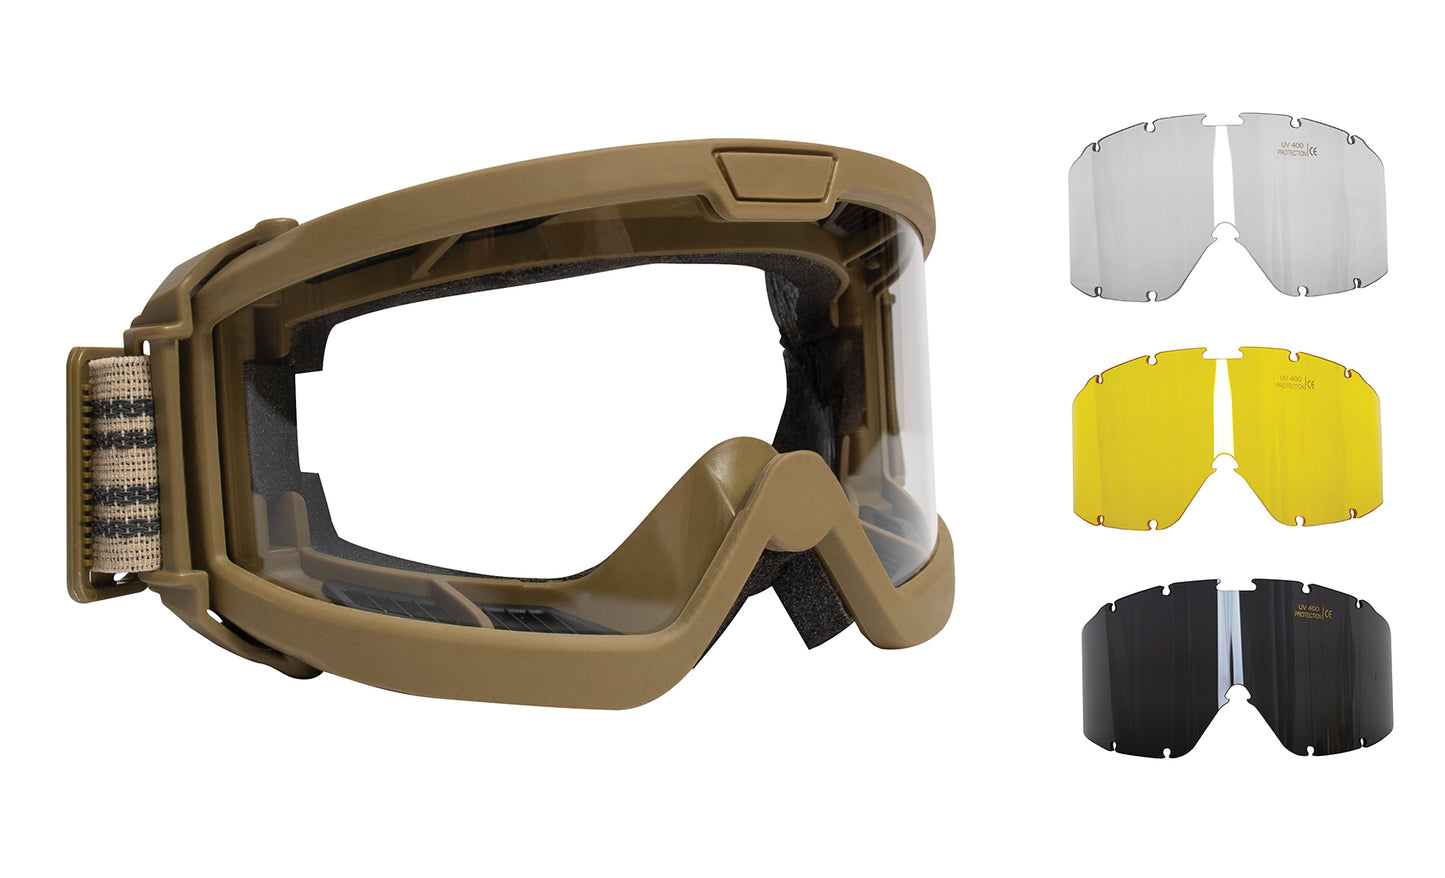 Milspec ANSI Ballistic OTG Goggle System Military & Tactical Goggles MilTac Tactical Military Outdoor Gear Australia